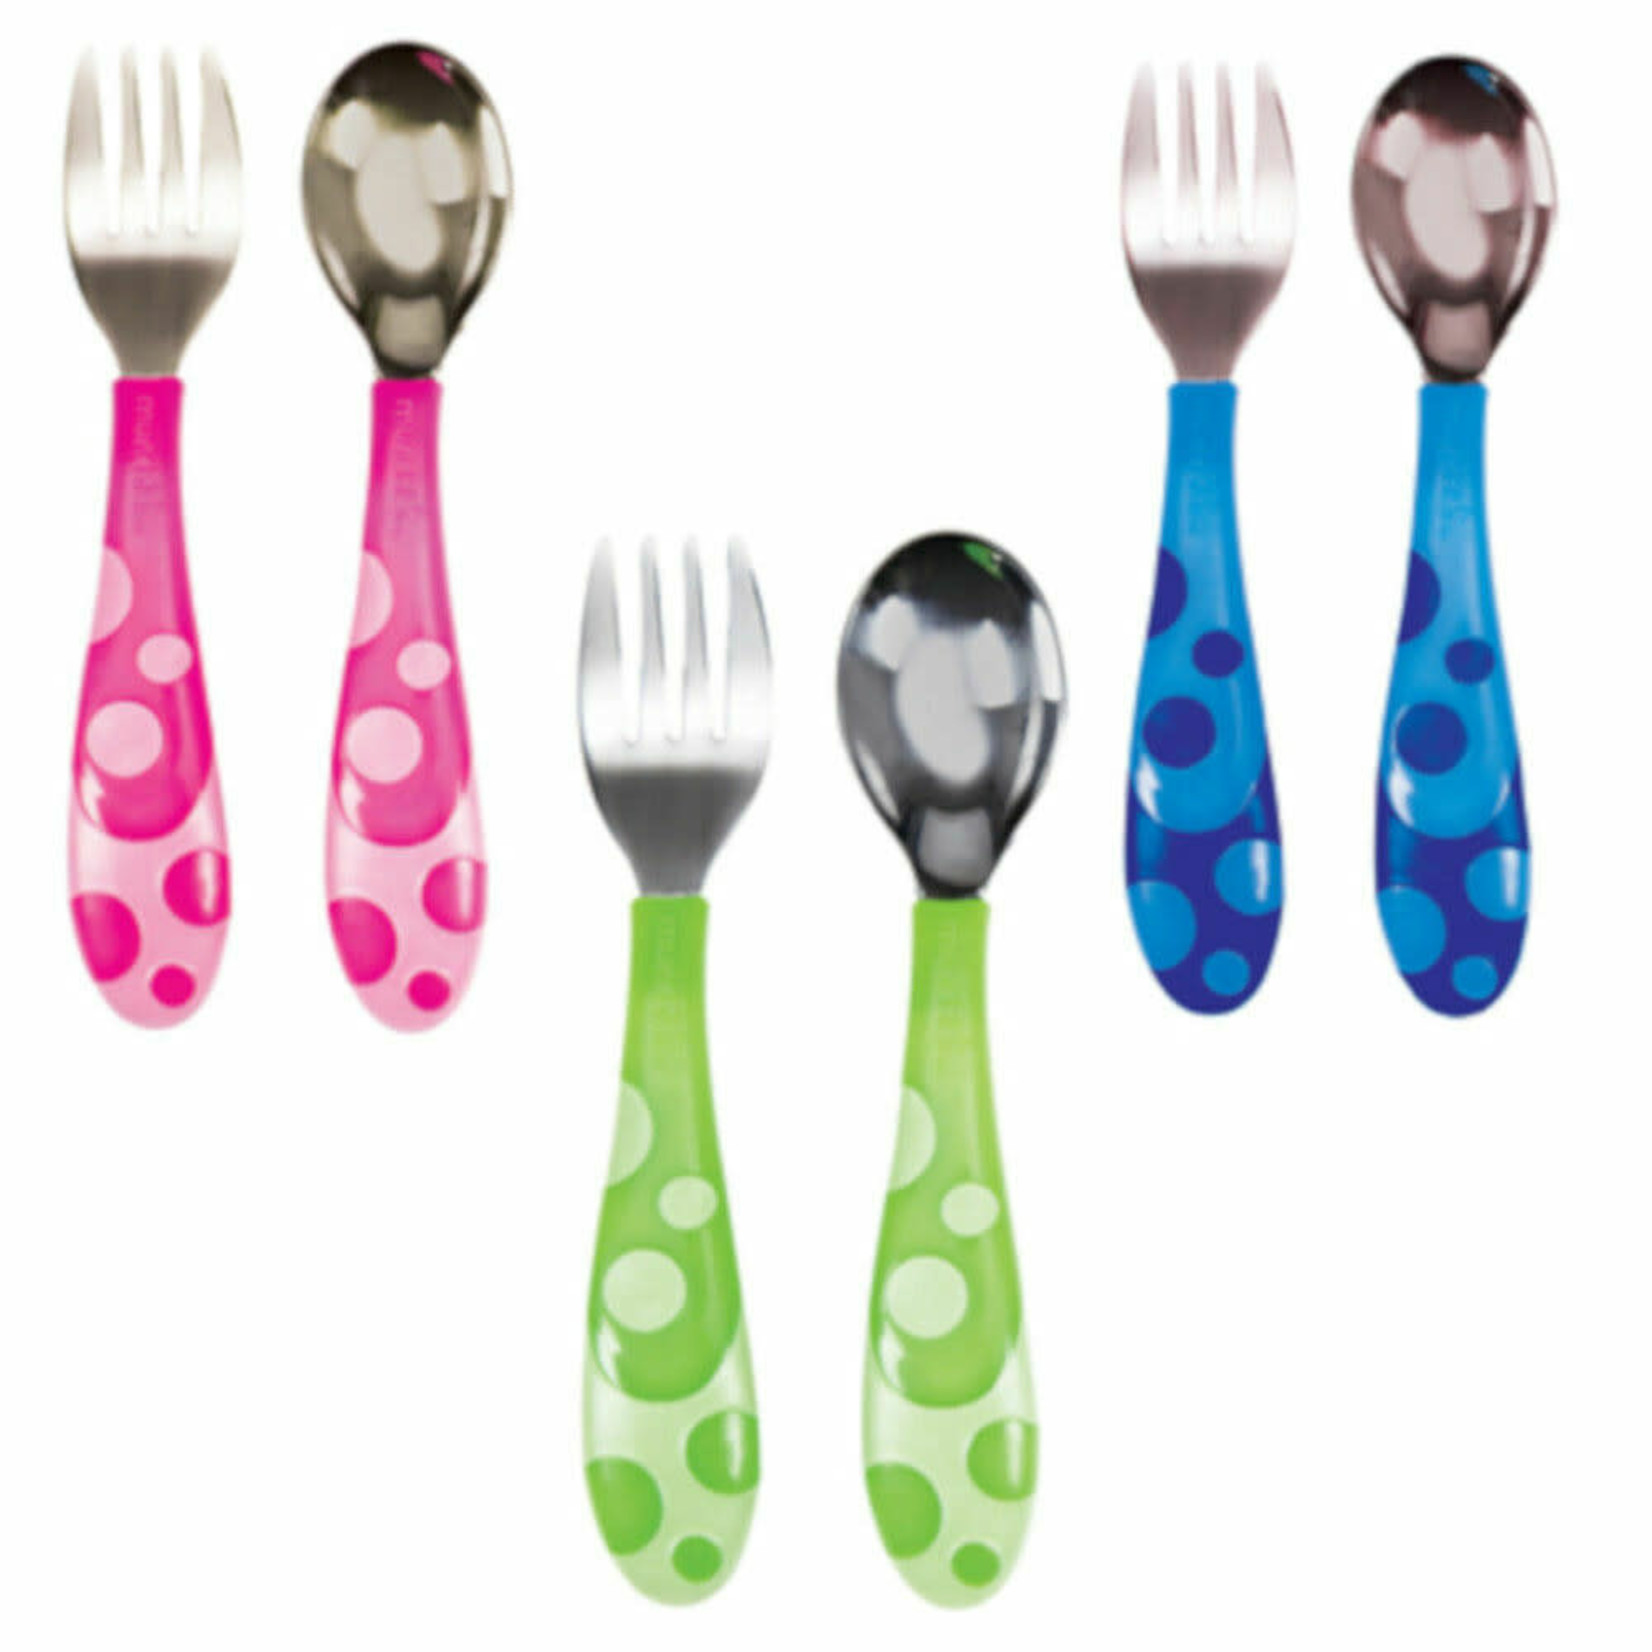 Munchkin Forks & Spoons, Multi, 12+ Months